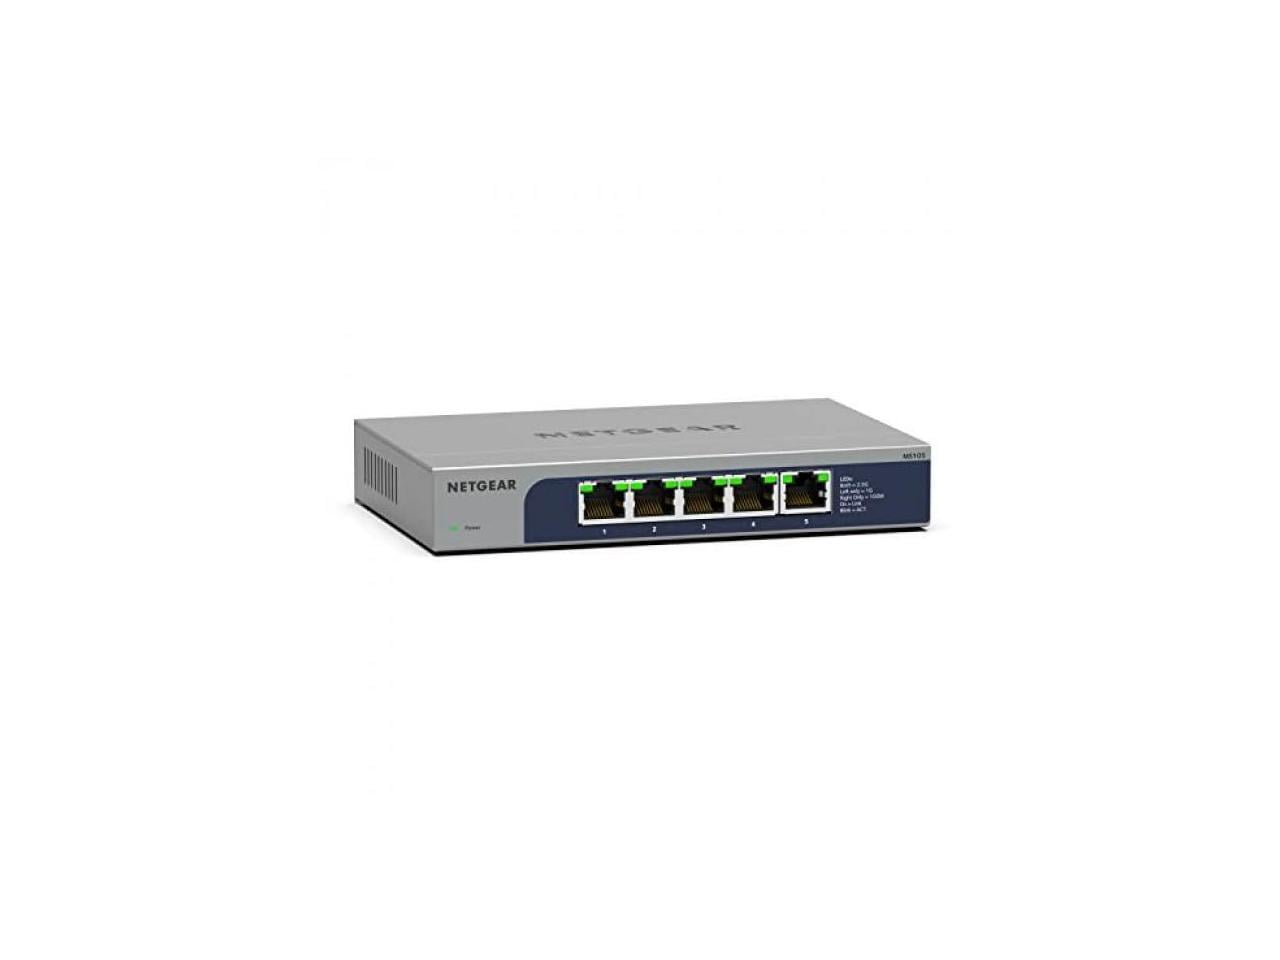 MokerLink 8 Port 2.5G Ethernet Switch with 10G SFP+, 8x2.5G RJ45 Ports  Compatible with 100/1000Mbps, Metal Unmanaged Fanless Desktop|Wallmount  Network